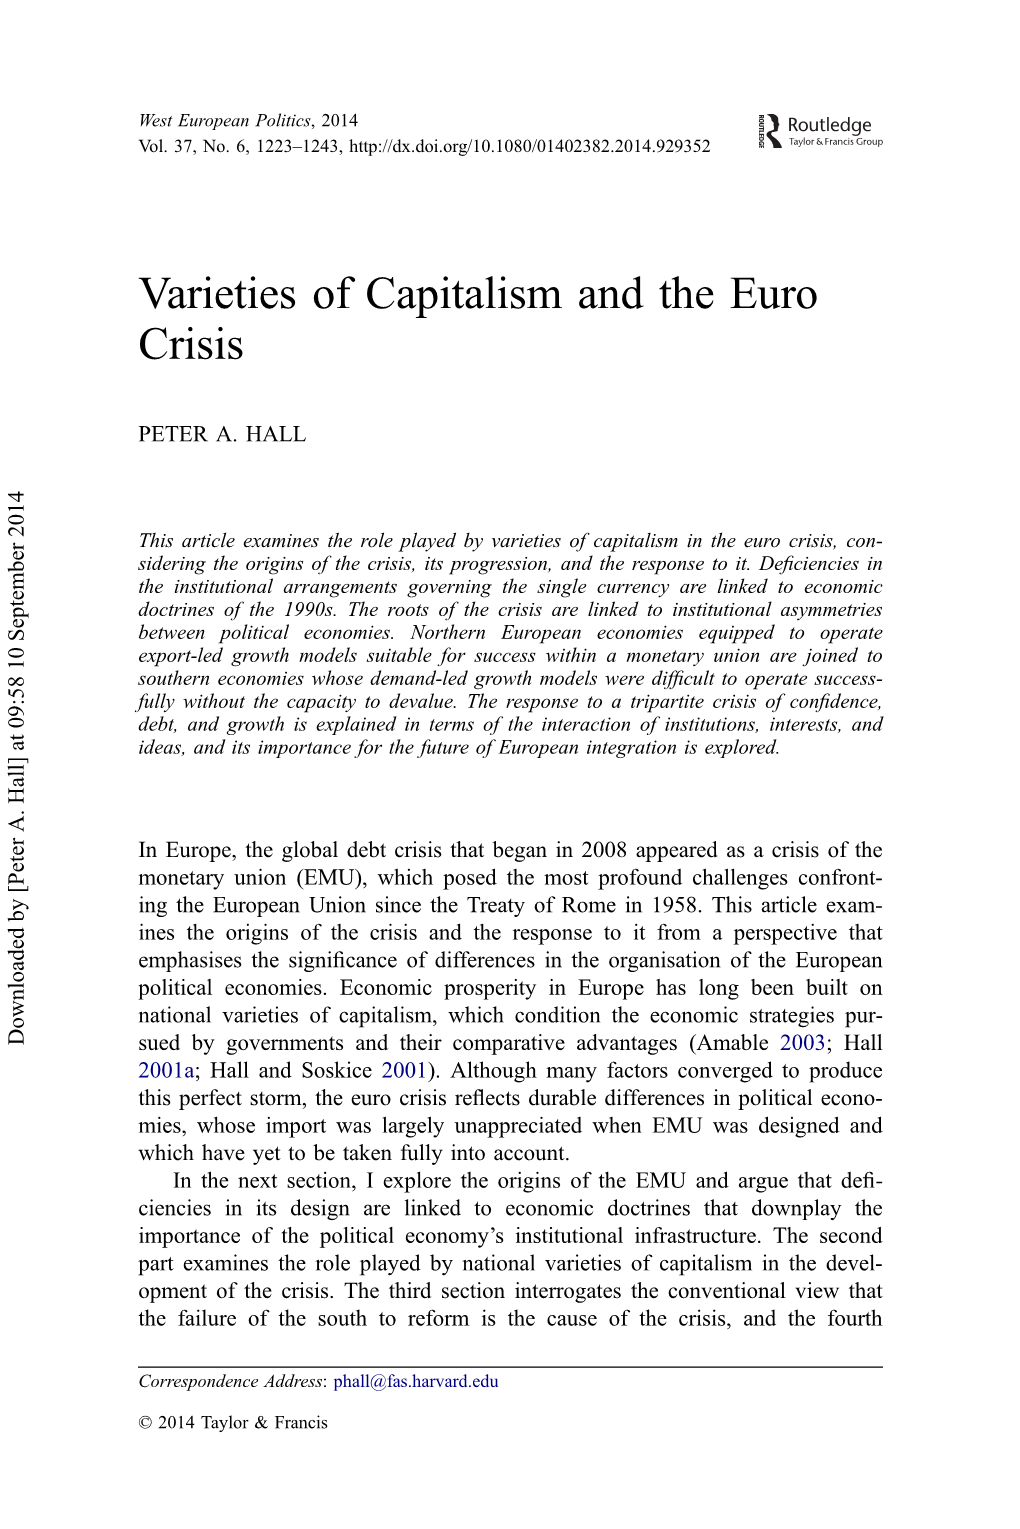 Varieties of Capitalism and the Euro Crisis